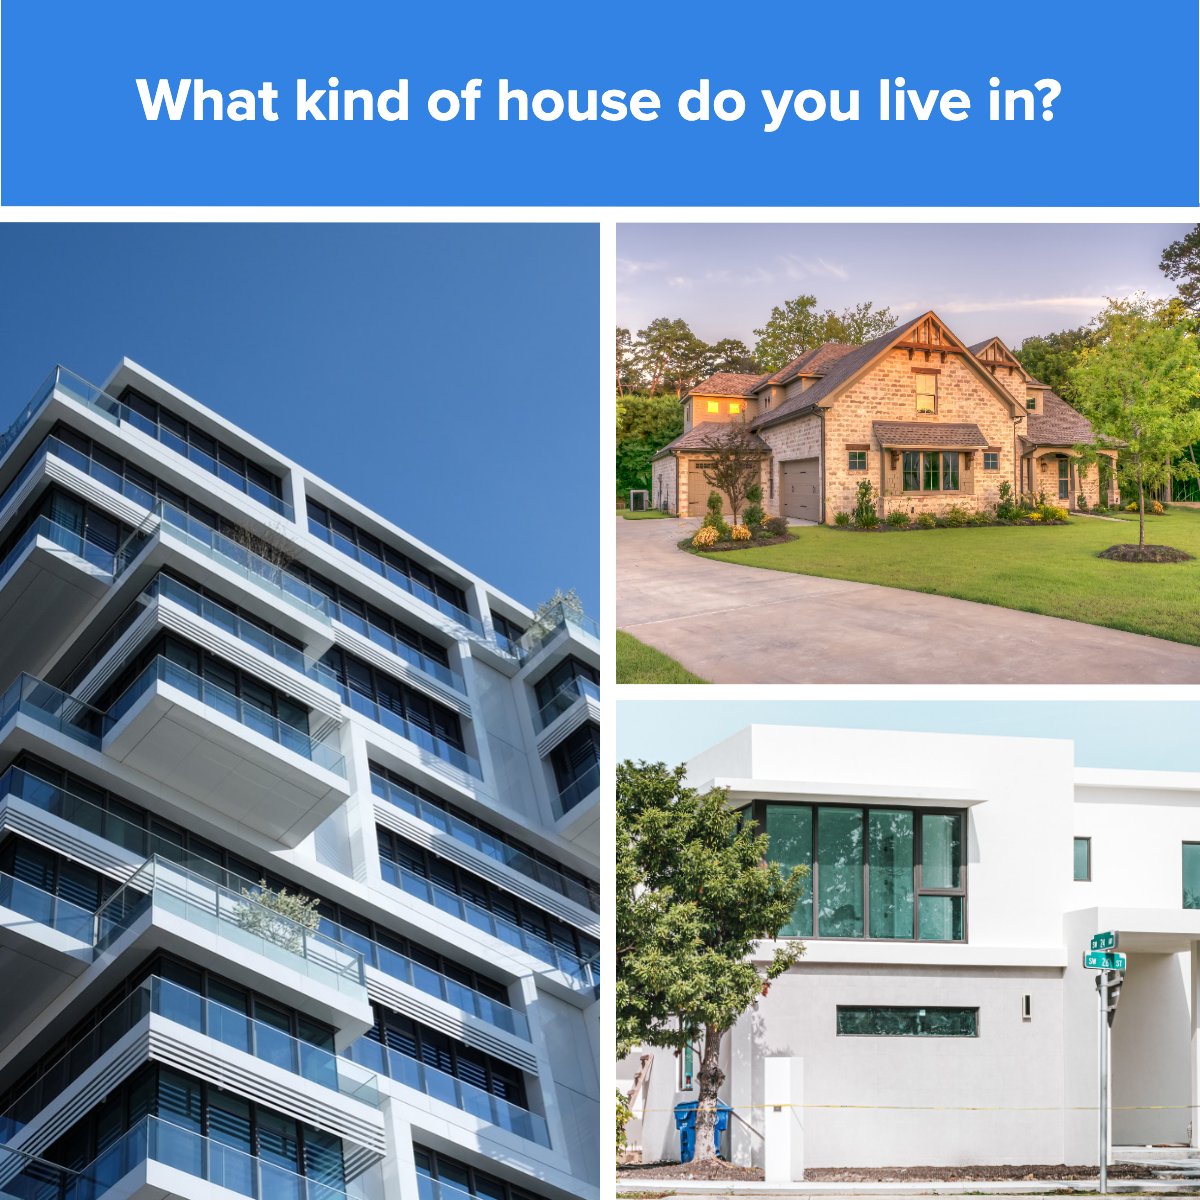 What kind of house do you live in? 🏡

#kindofhouse #housetype #realestate #question #singlefamilyhome #condo #townhouse
 #SchuylerRealty #KellerWilliamsRealty #GroveCityRealEstate #KellerWilliamsConsultants #MarineCorpsVeteran #MilitaryHomebuyers #ServingHomebuyer